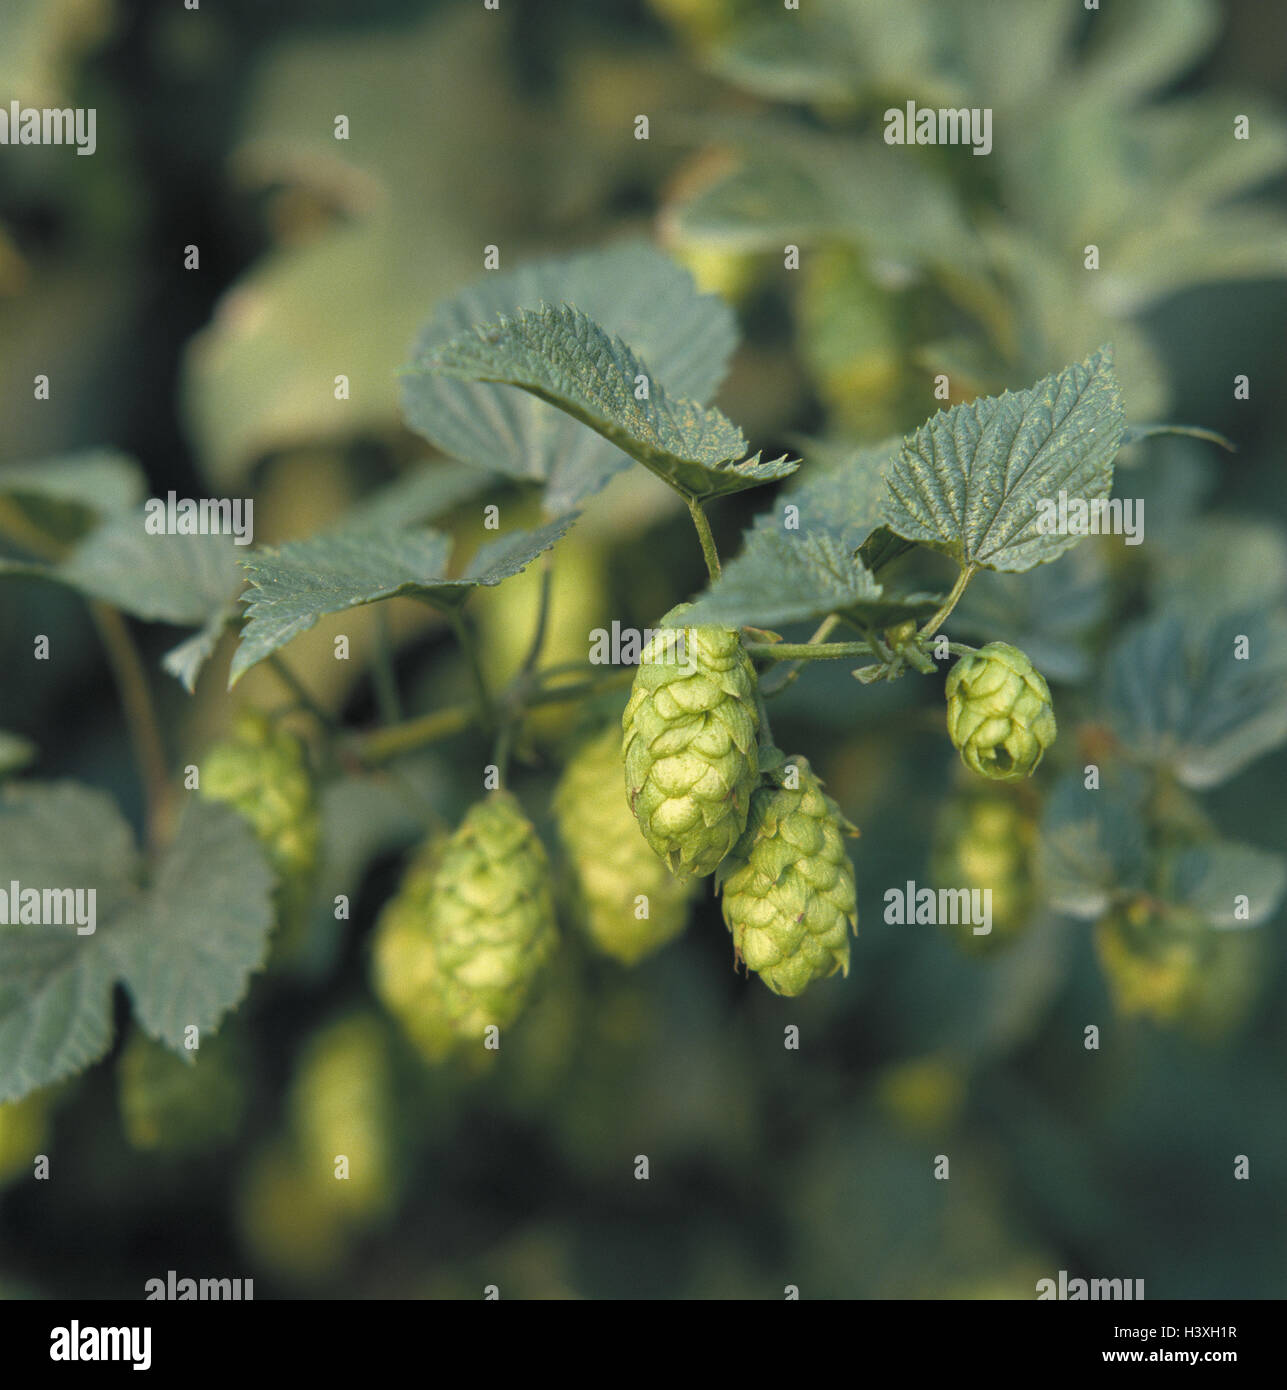 Hops, Humulus lupulus, detail, umbels, blossoms, hemp plant, climber, climbing plant, green, beer, brewing, component, plant, useful plant, hop umbels, fruit plugs Stock Photo